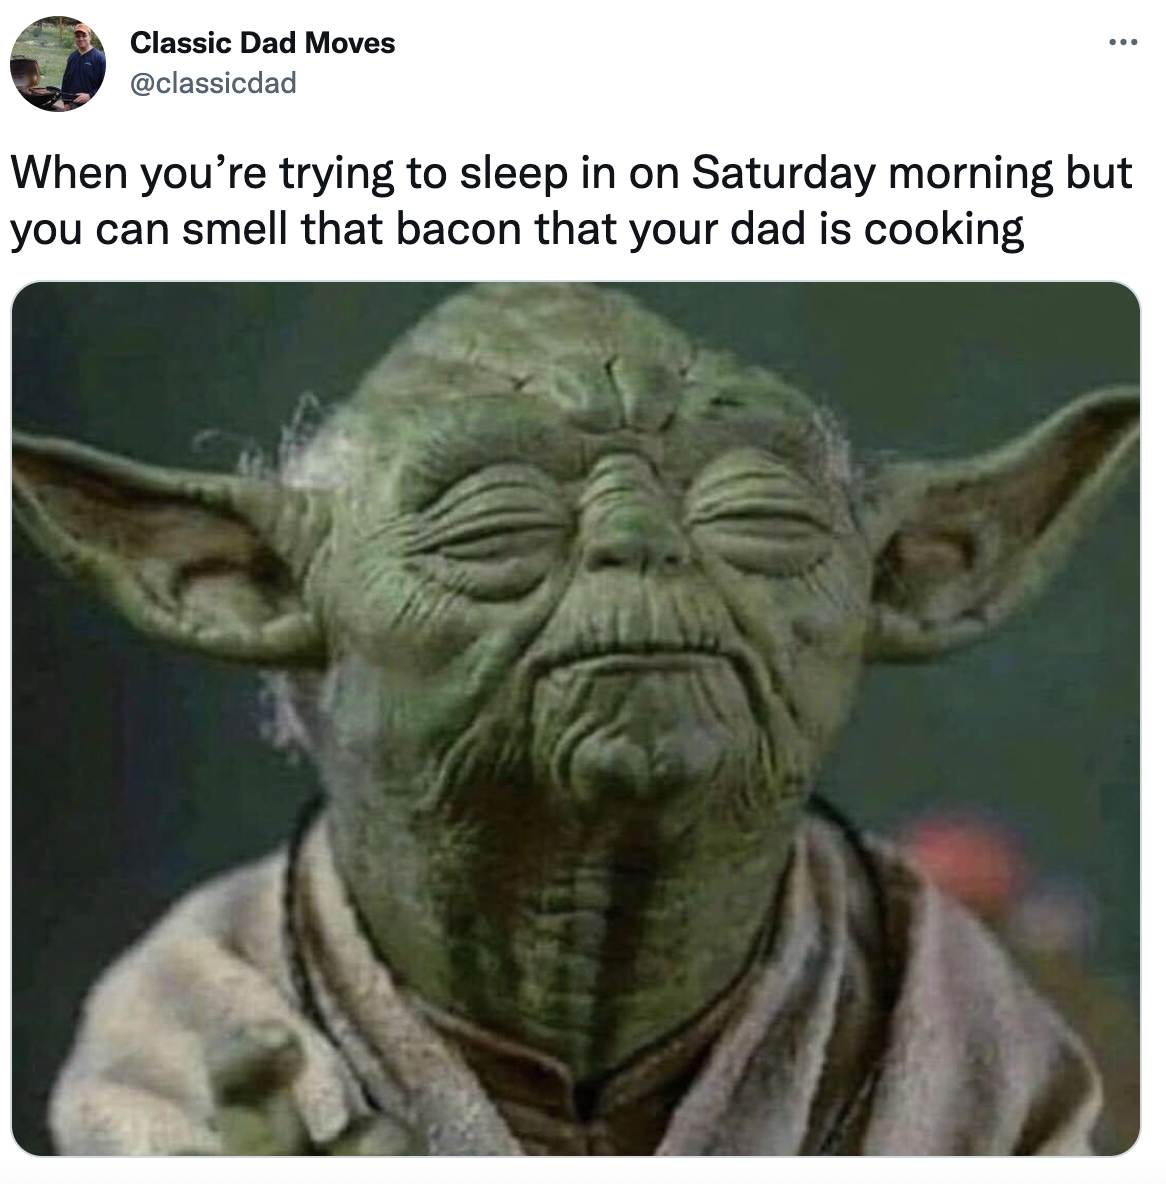 Dank Dad Memes - mom funny baby memes - Classic Dad Moves When you're trying to sleep in on Saturday morning but you can smell that bacon that your dad is cooking